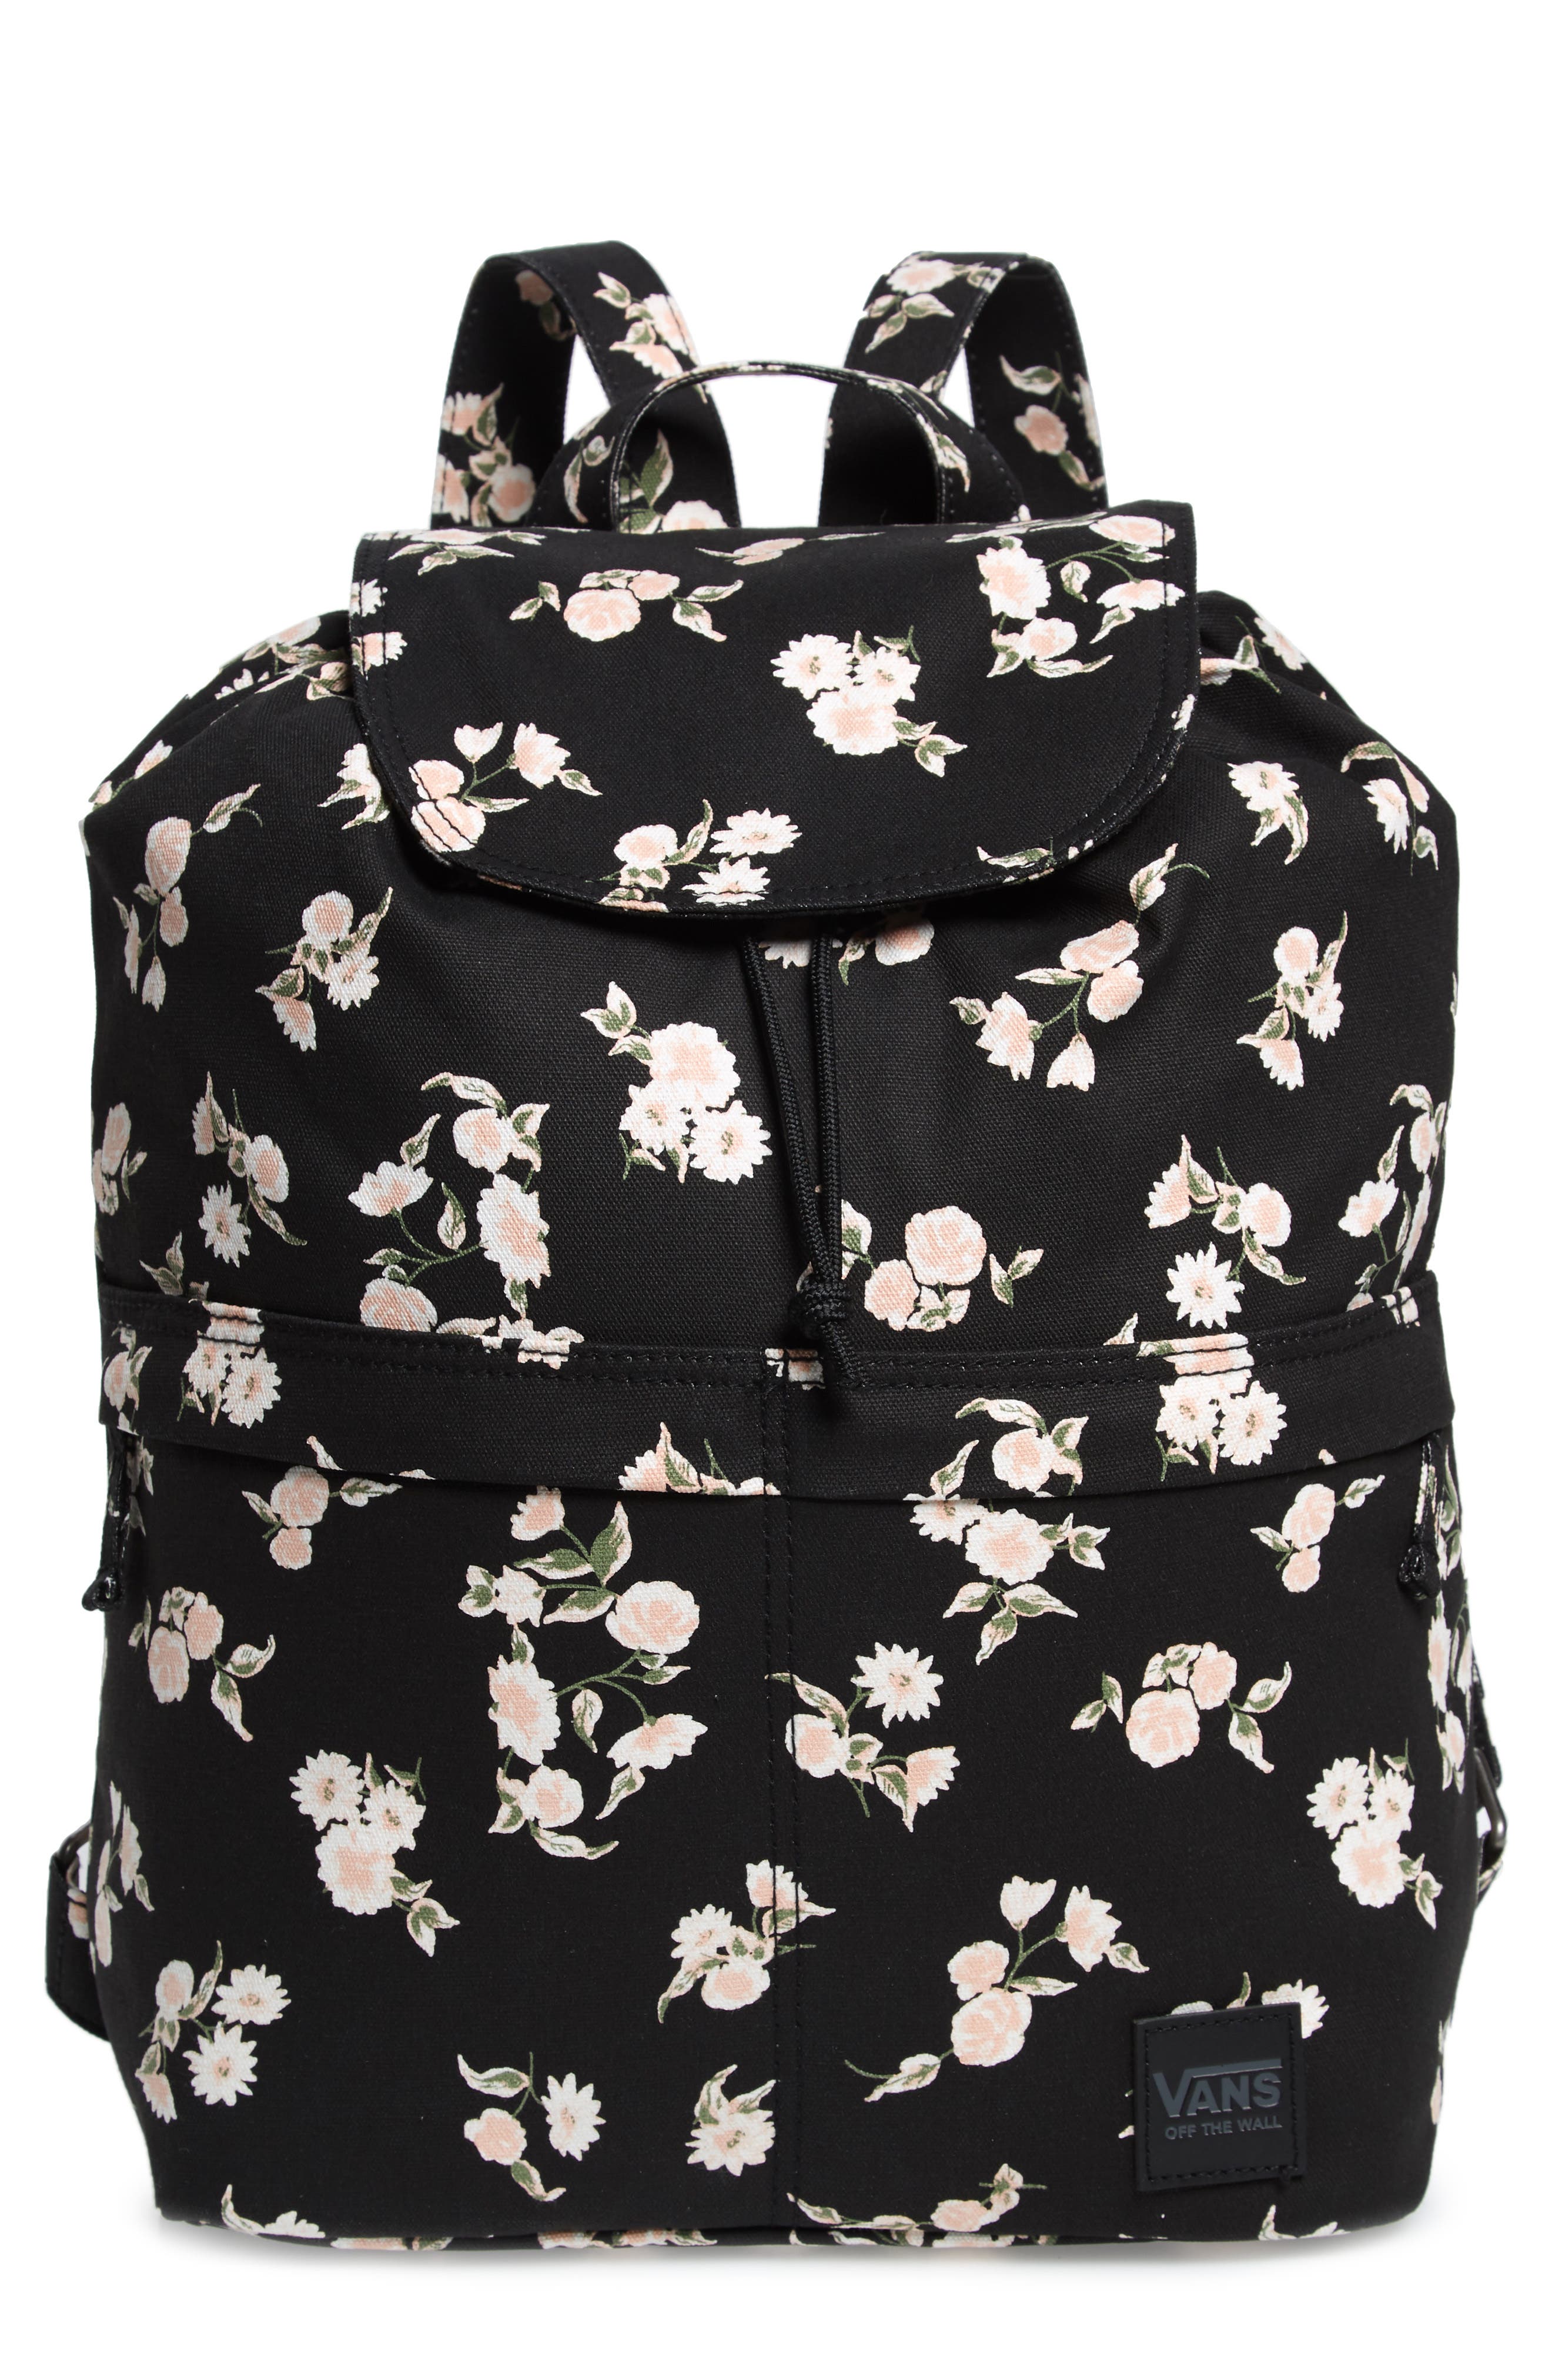 Buy 2 Off Any Vans School Bags For Girls Case And Get 70 Off